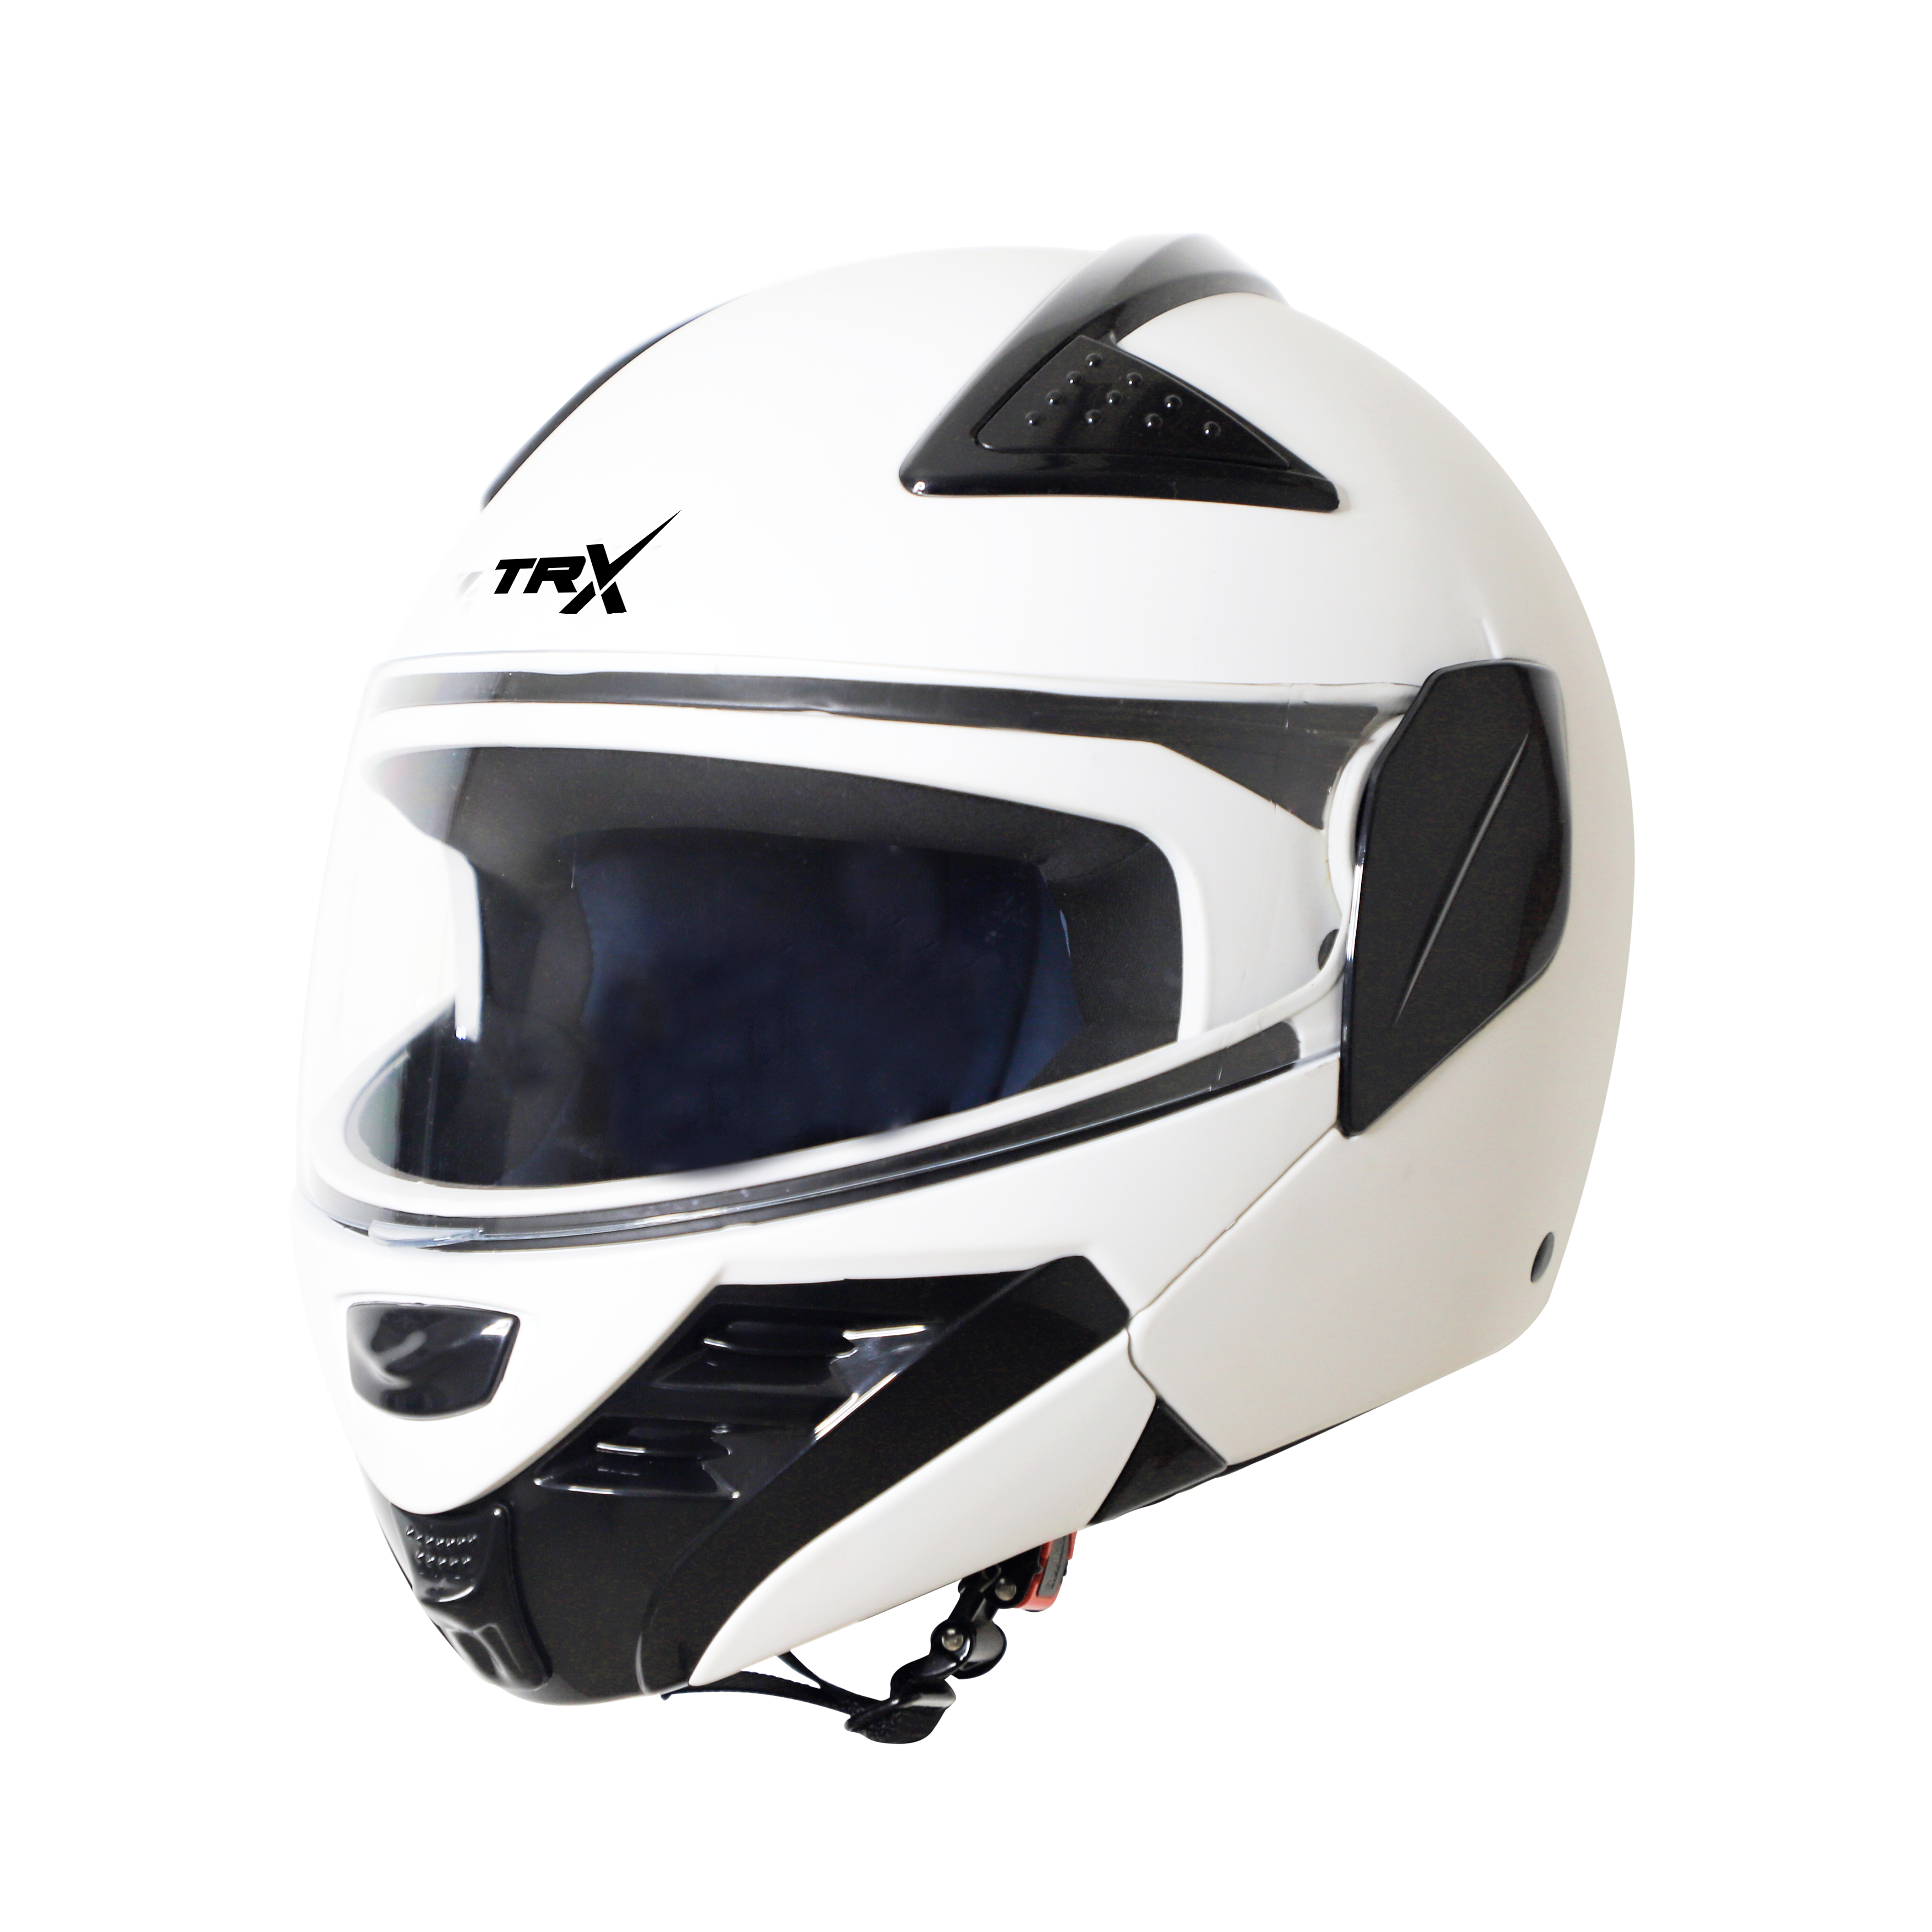 Steelbird SB-34 ISI Certified Flip-Up Helmet For Men And Women (Glossy White With Clear Visor)